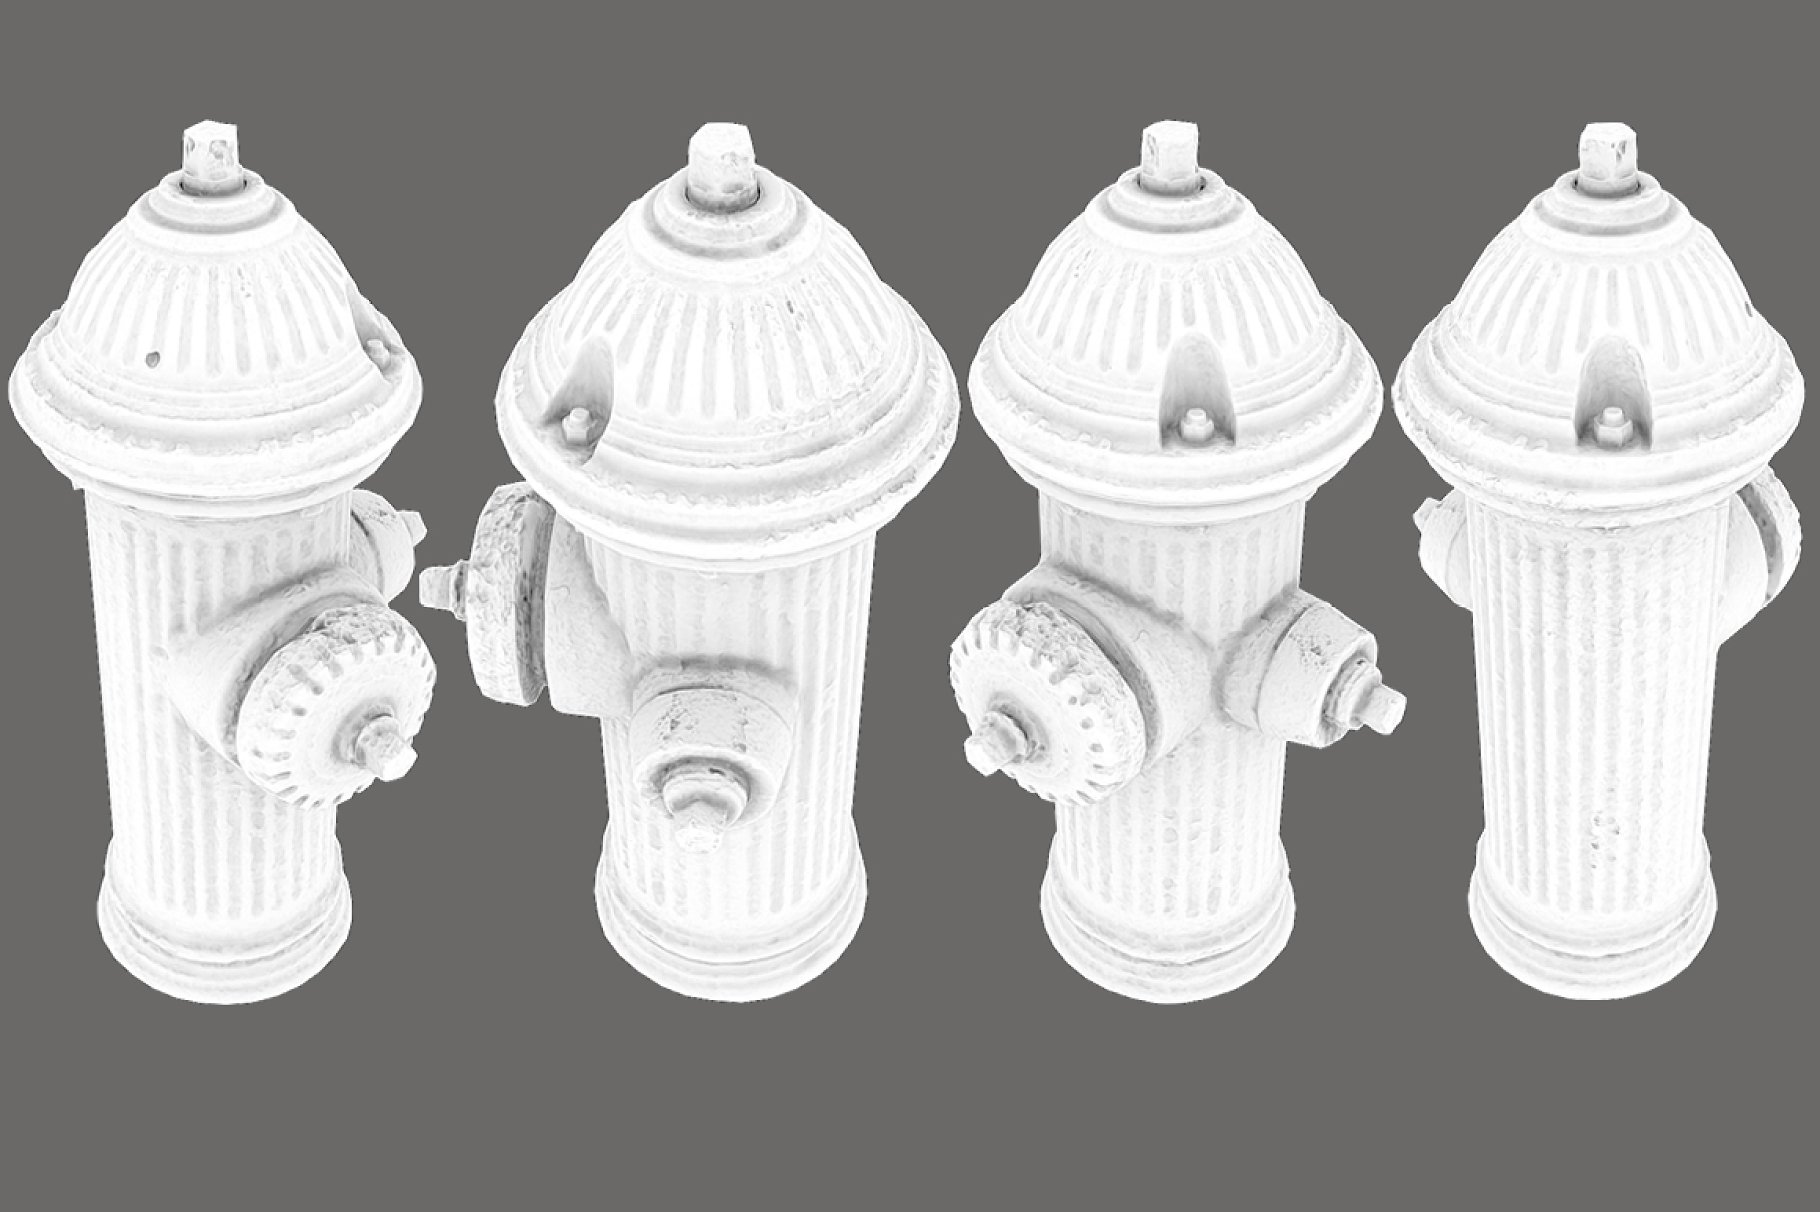 4 mockups of fire hydrant from above in white.